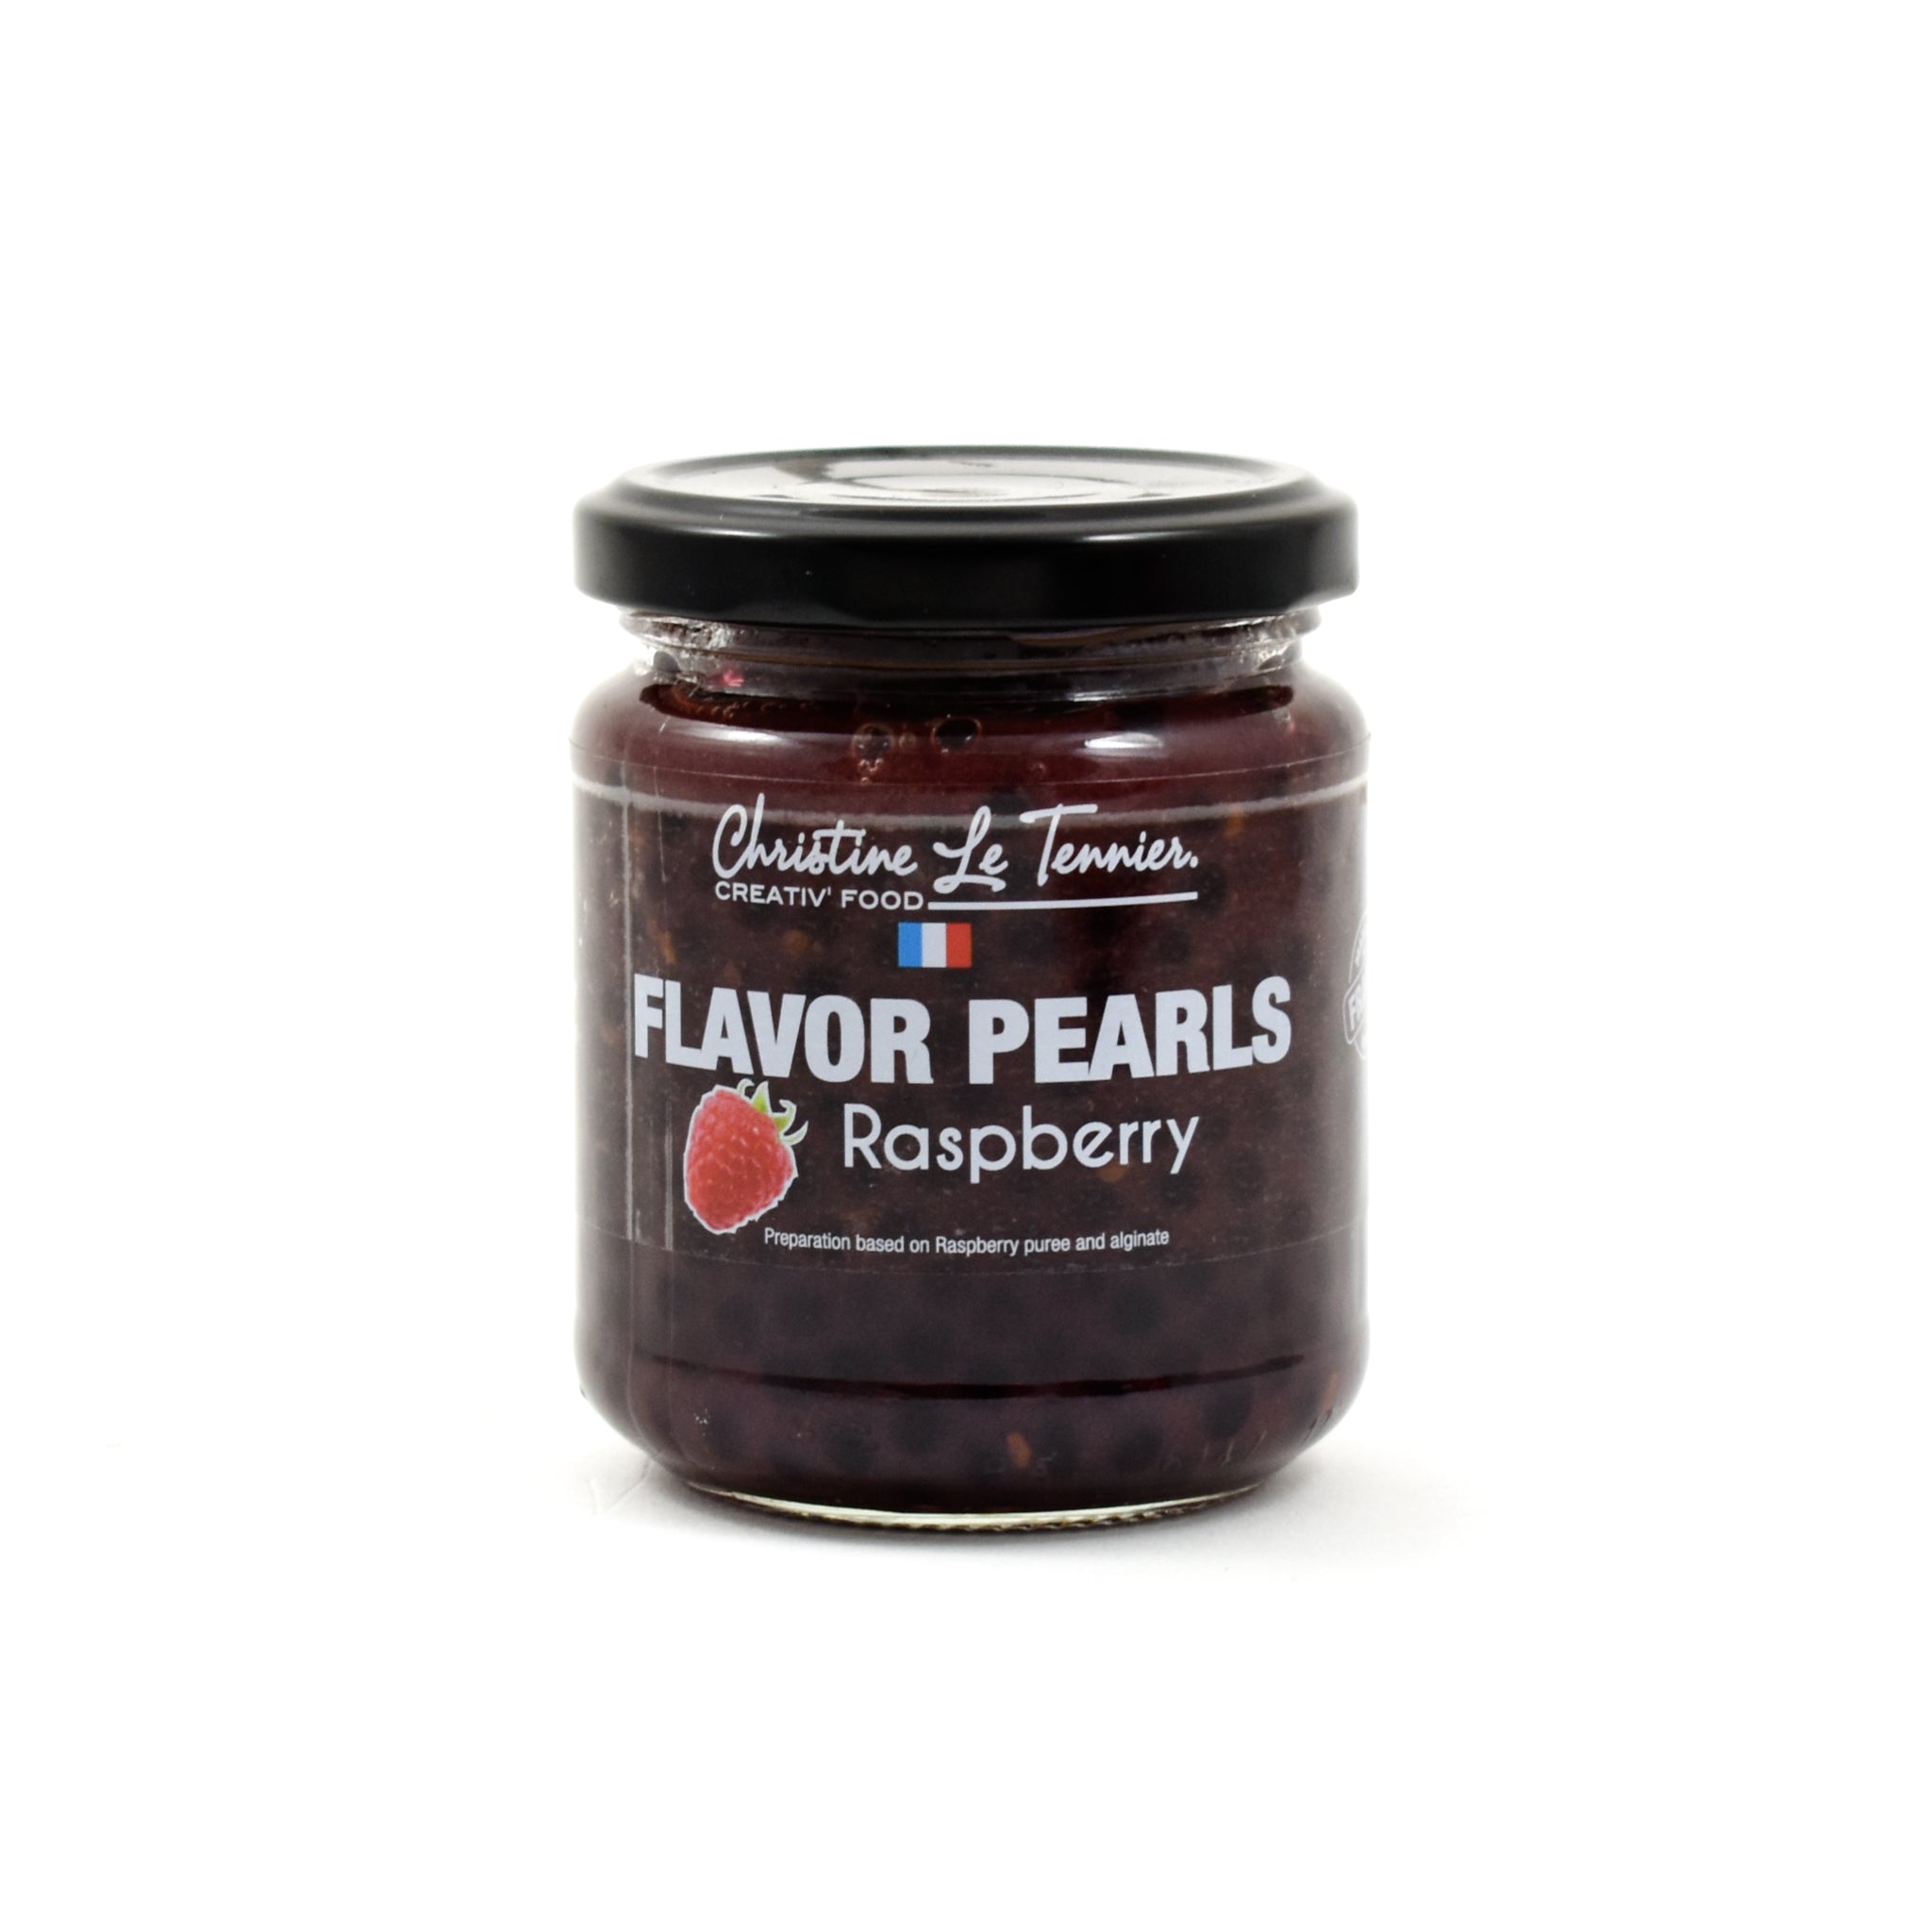 Raspberry Flavour Pearls Modernist and Molecular Cuisine French Food & Recipes jar shot